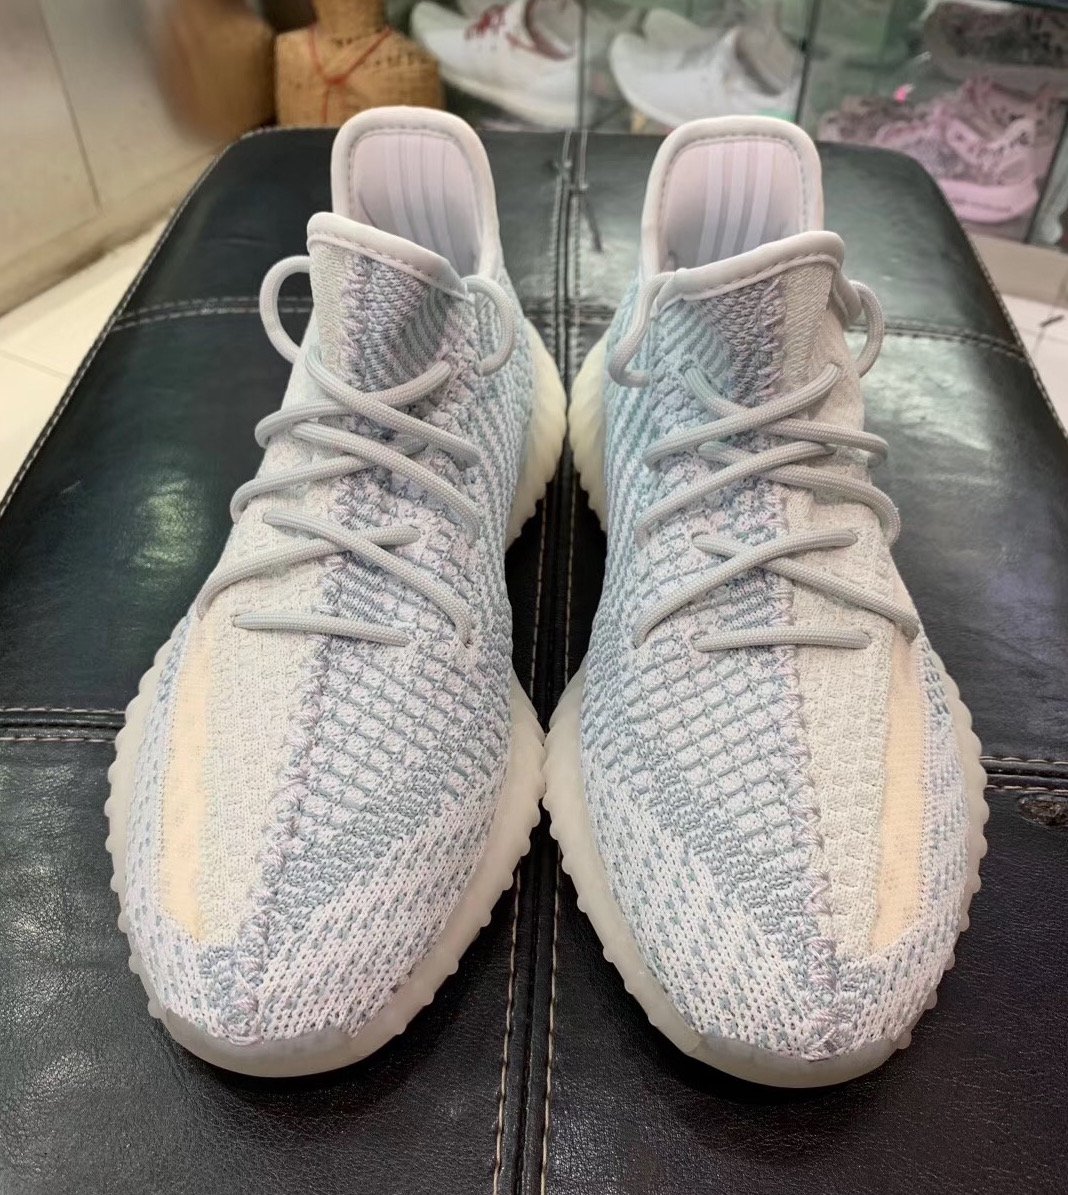 yeezy cloud white reflective release date